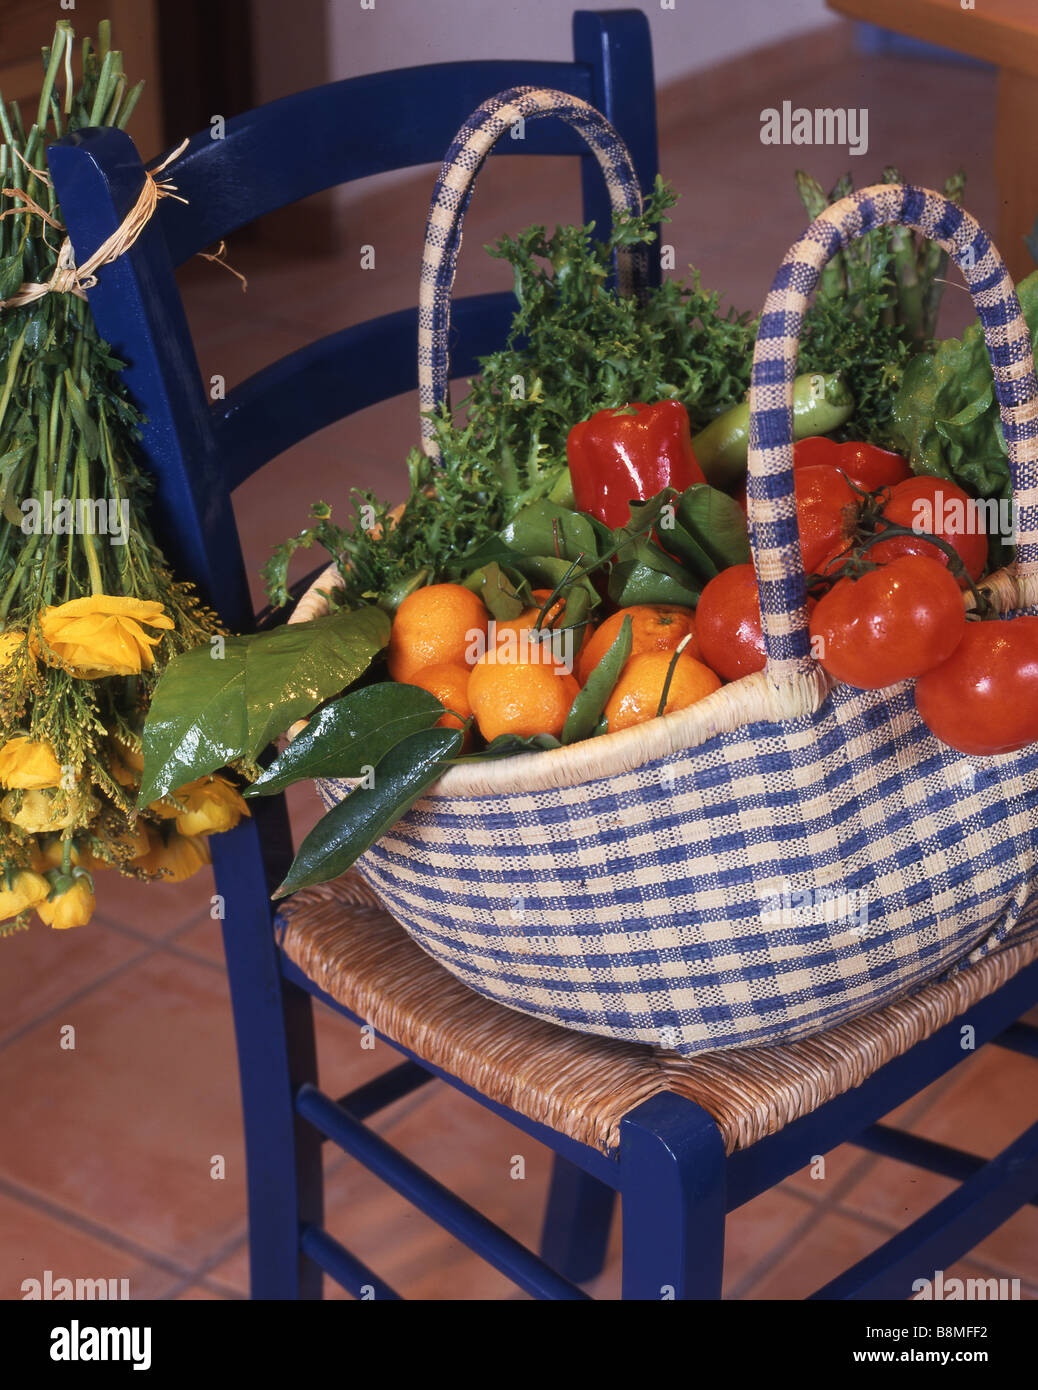 shopping basket with vegetables Stock Photo